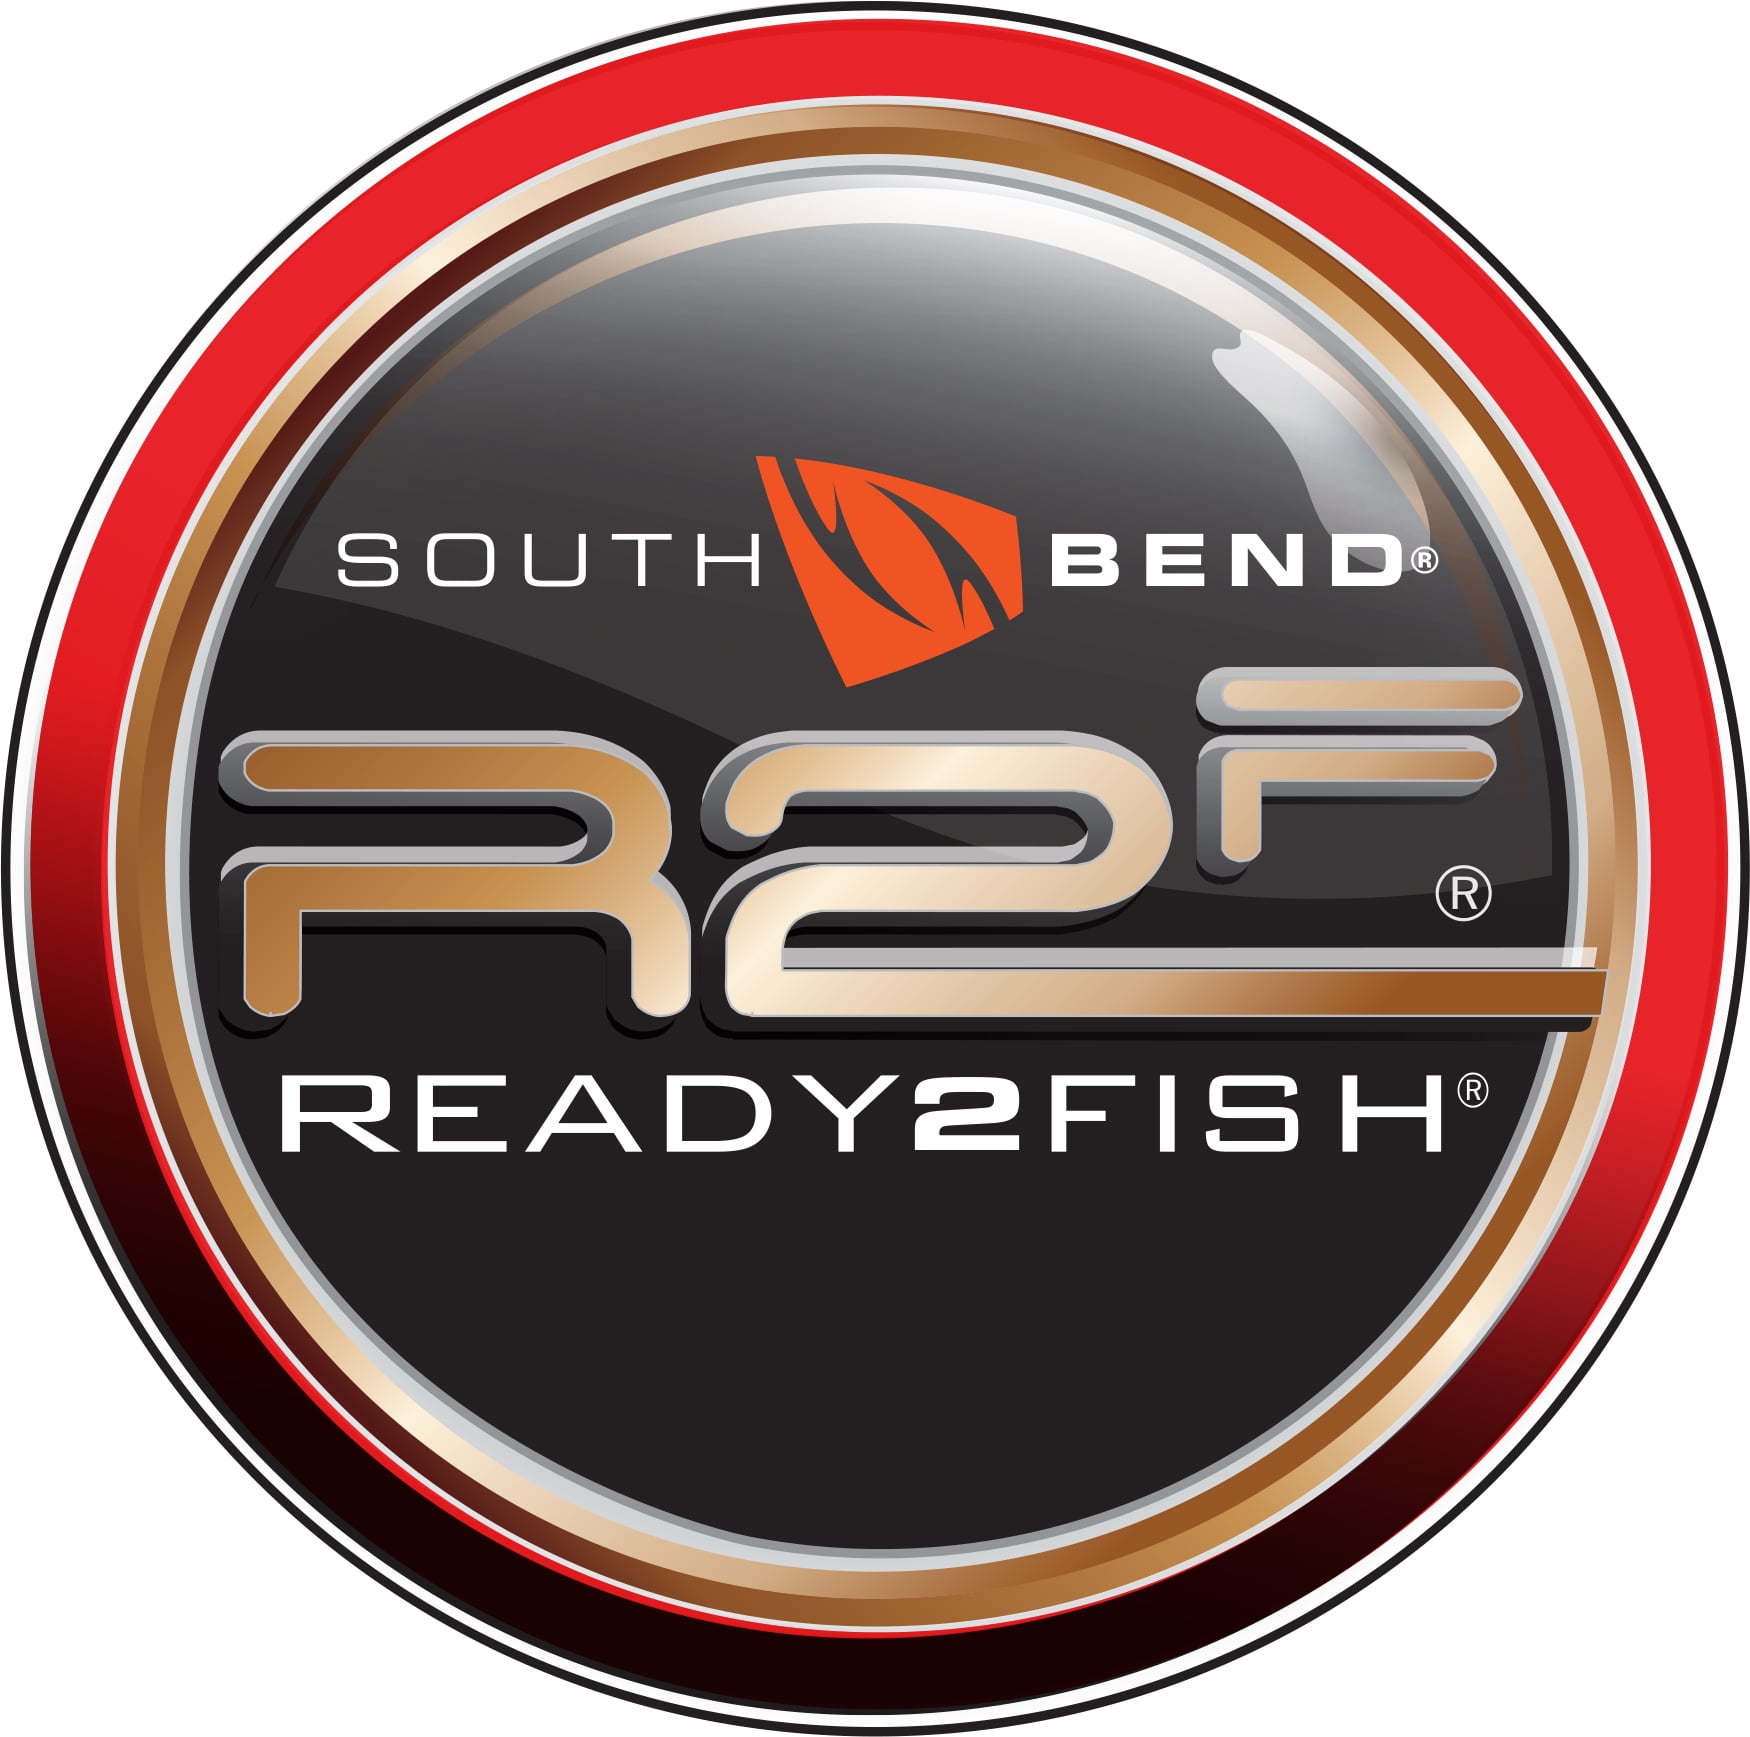 South Bend R2F Striper Fishing Rod & Reel Spin Combo w/ Tackle Kit, 8